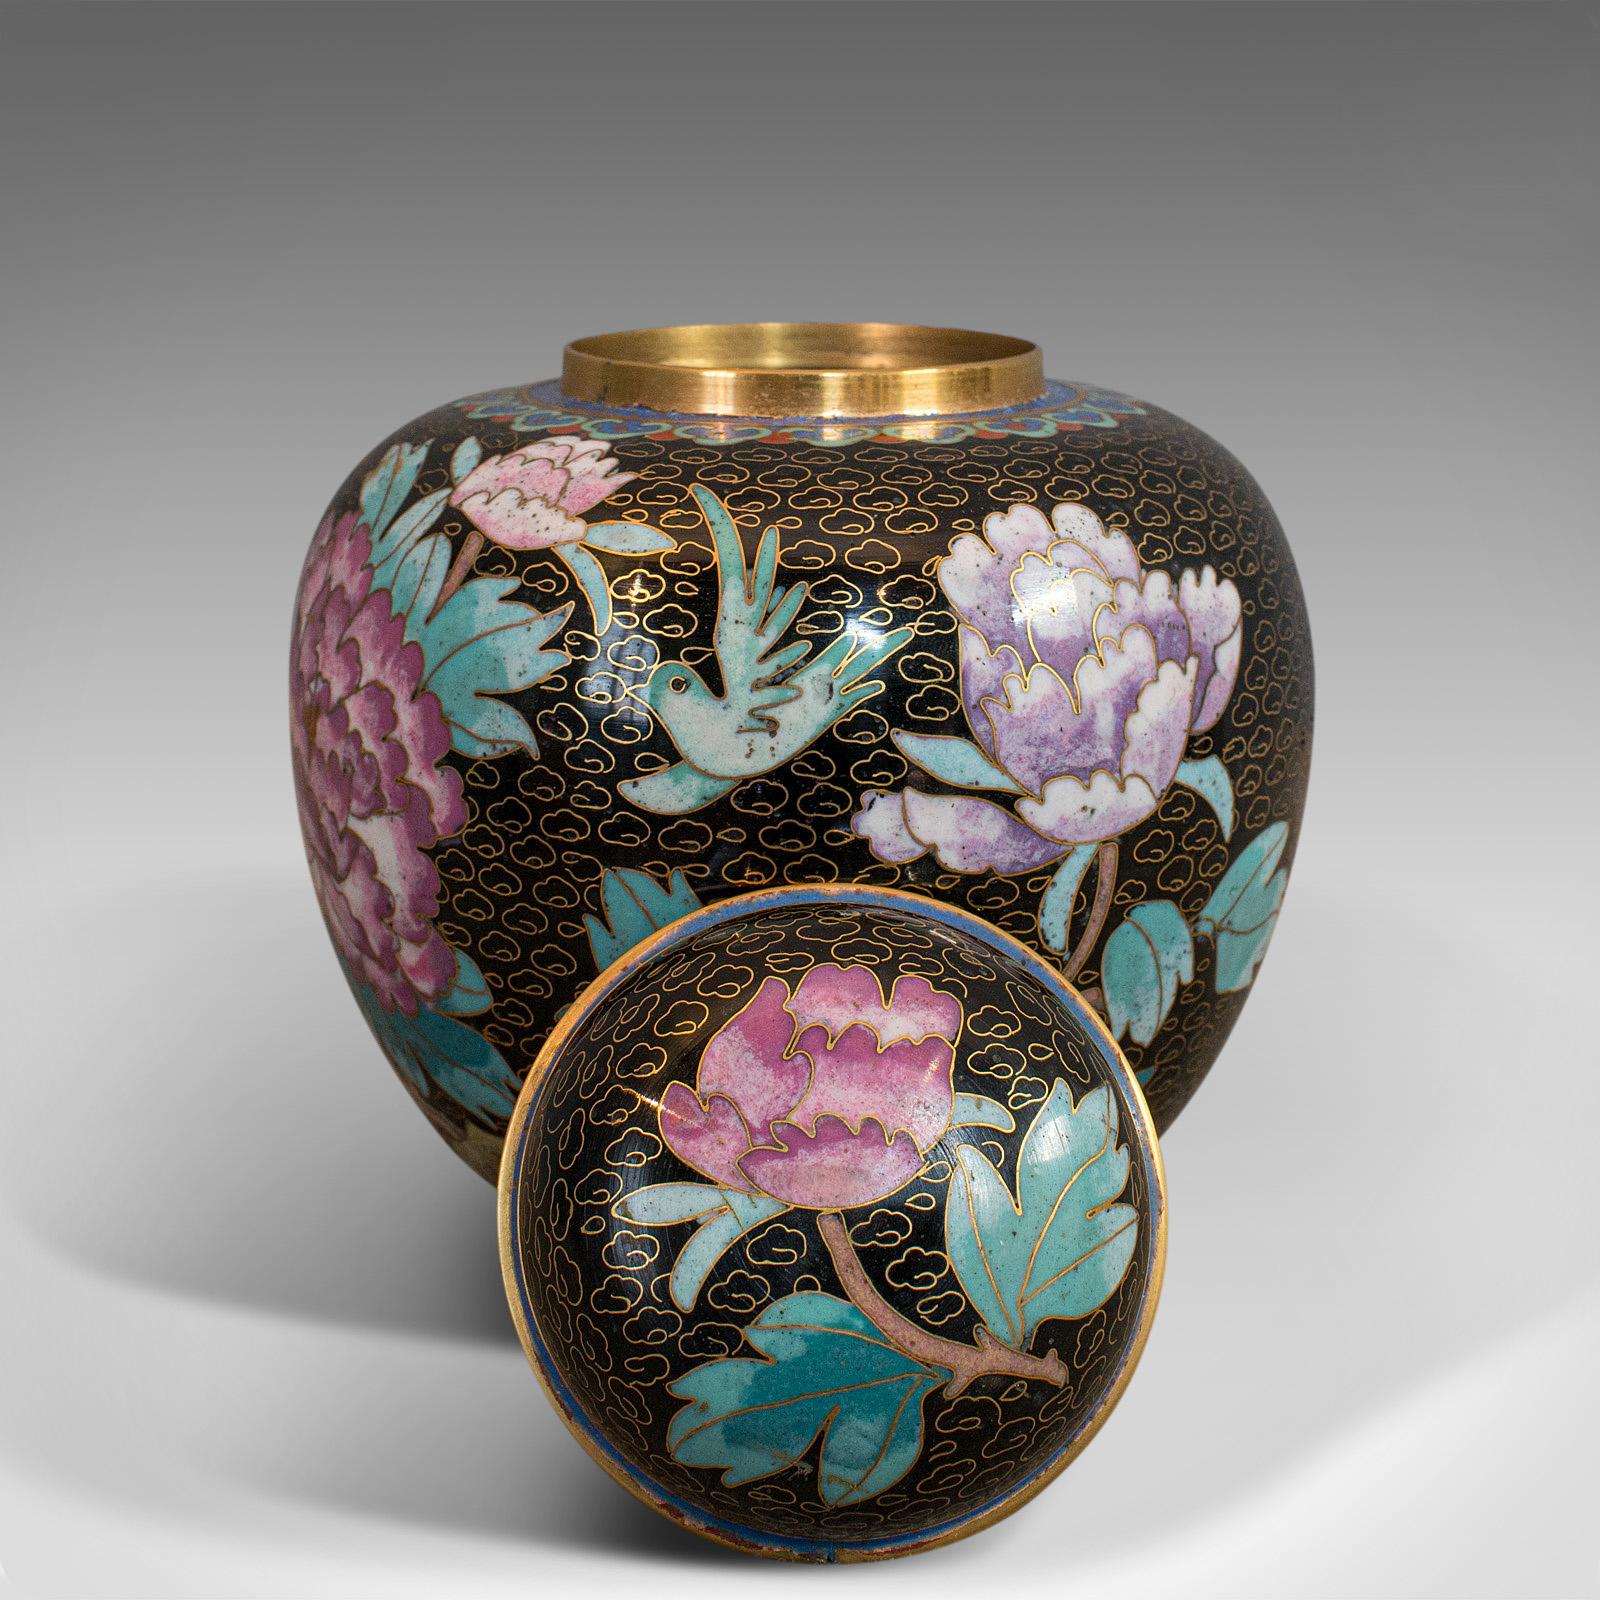 Our stock # 18.6509

This is an antique ginger jar. An oriental, cloisonné spice urn, dating to the late Victorian period, circa 1900.

Highly decorative example of cloisonné
Displays a desirable aged patina
Cloisonné in good order